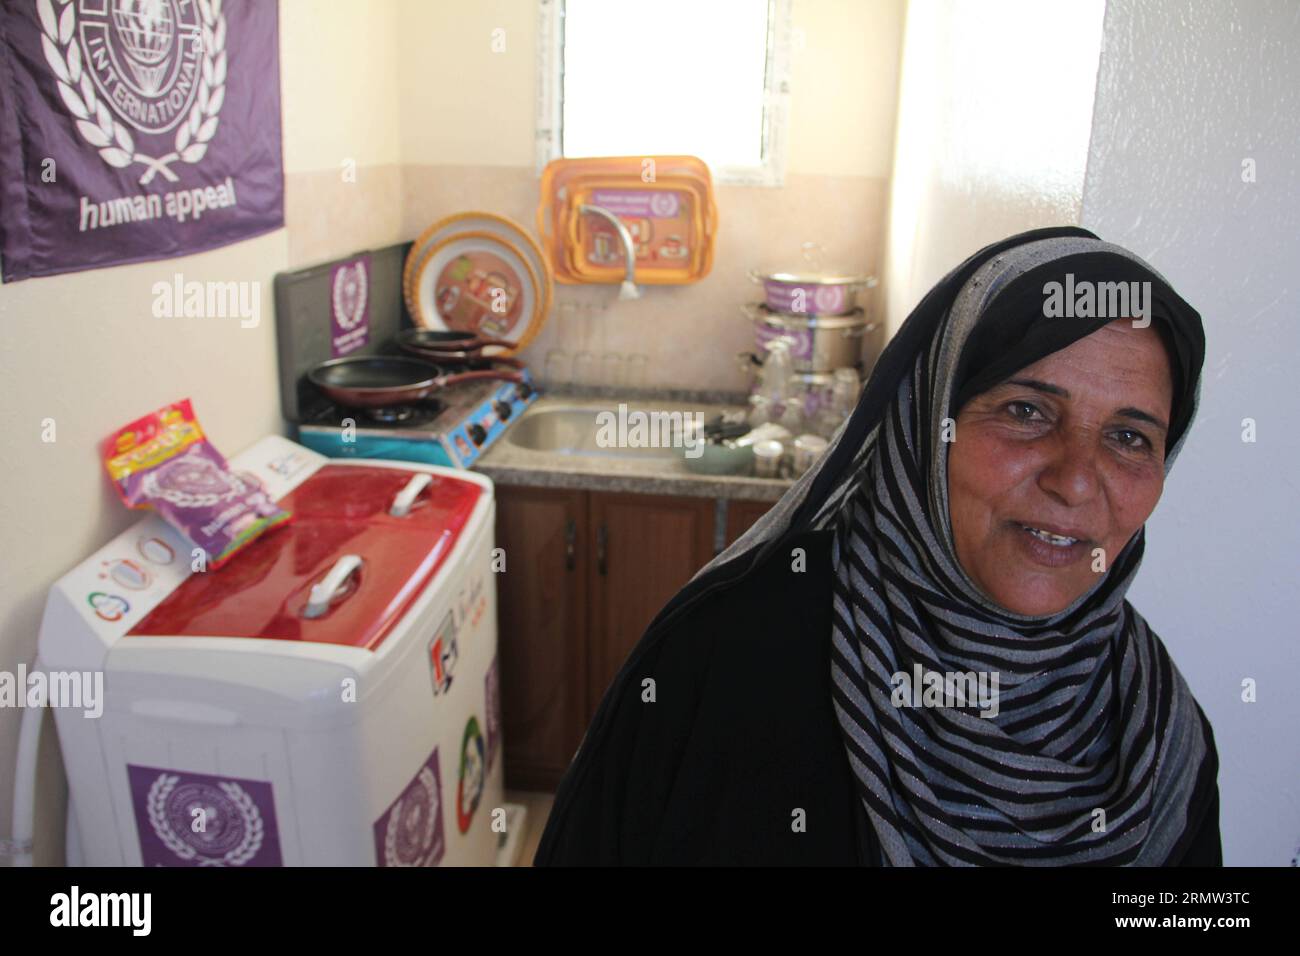 GAZA, Oct. 1, 2014 -- A Palestinian checks her new mobile home after they were made homeless in the recent Israeli-Hamas war, in Khuzaa neighborhood in the southern Gaza Strip city of Khan Younis, on October 1, 2014. ) MIDEAST-GAZA- MOBILE-HOMES KhaledxOmar PUBLICATIONxNOTxINxCHN   Gaza OCT 1 2014 a PALESTINIAN Checks her New Mobile Home After They Were Made Home in The Recent Israeli Hamas was in  Neighborhood in The Southern Gaza Strip City of Khan Younis ON October 1 2014 Mideast Gaza Mobile Homes  PUBLICATIONxNOTxINxCHN Stock Photo